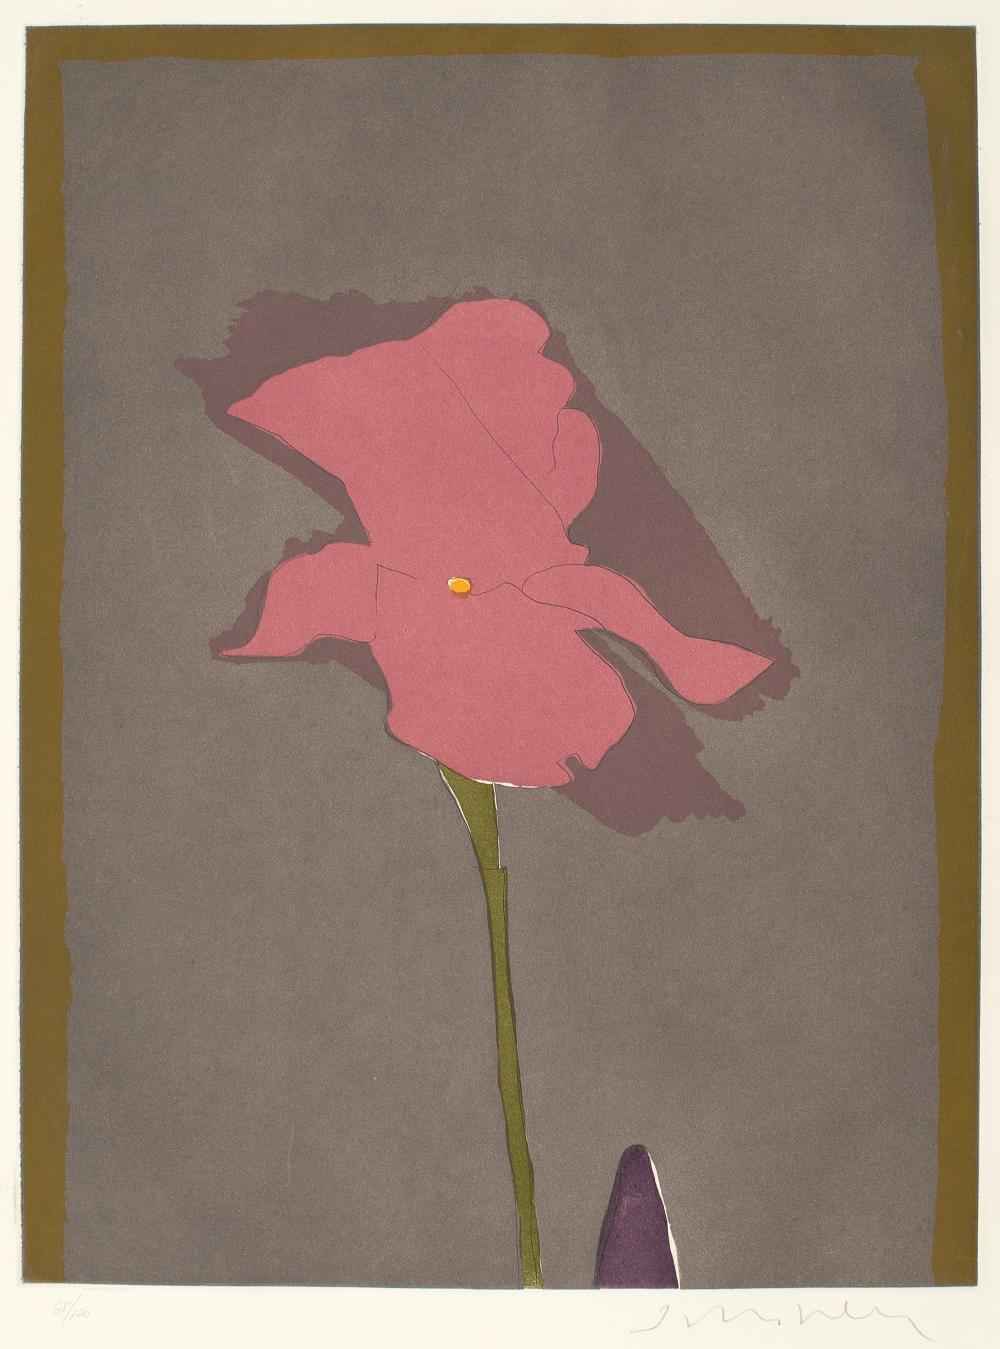 FRITZ SCHOLDER FLOWER AT GIVERNY 2fd2f7